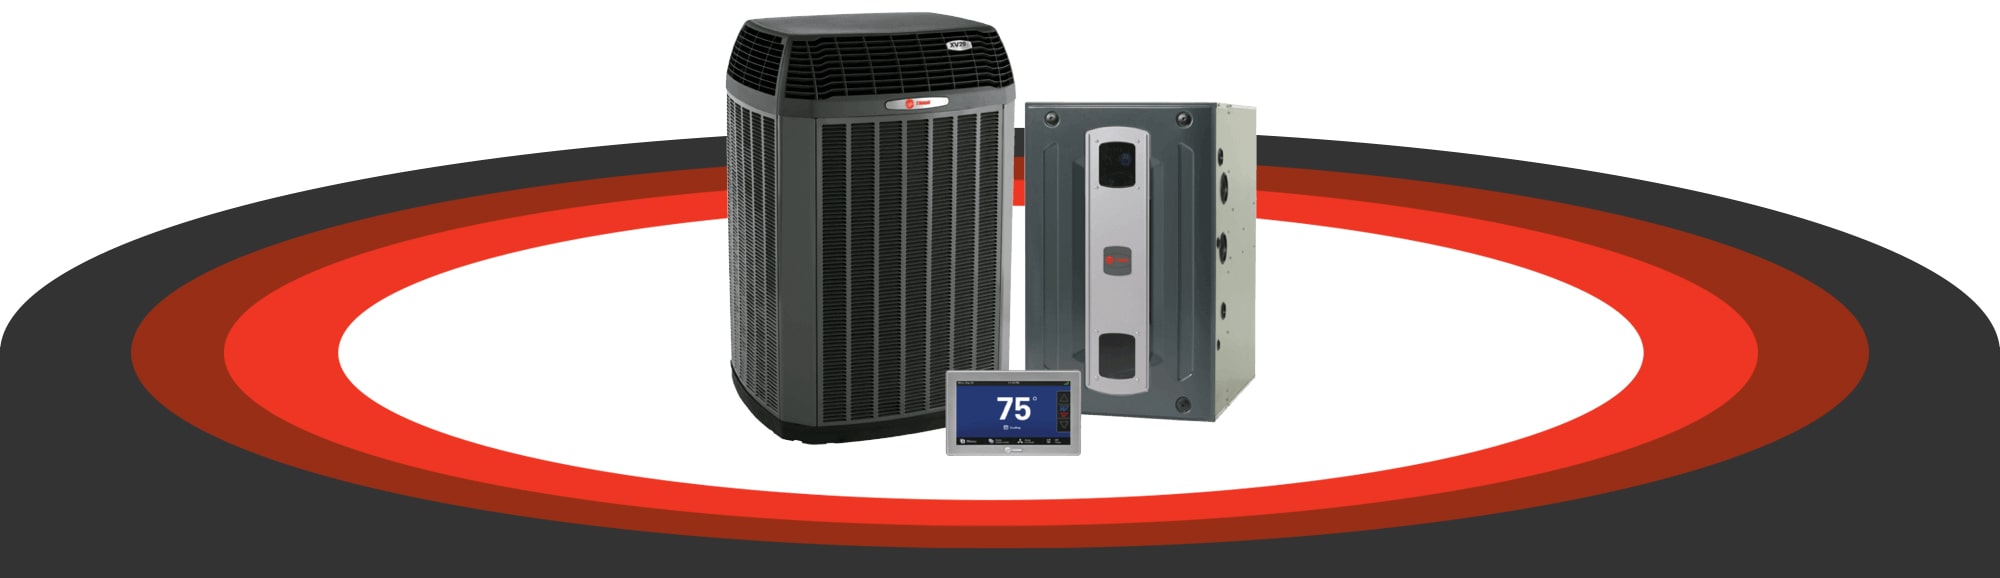 Live in Centennial CO? Get your Trane Furnace units serviced  by 5280 Heating & Air Conditioning